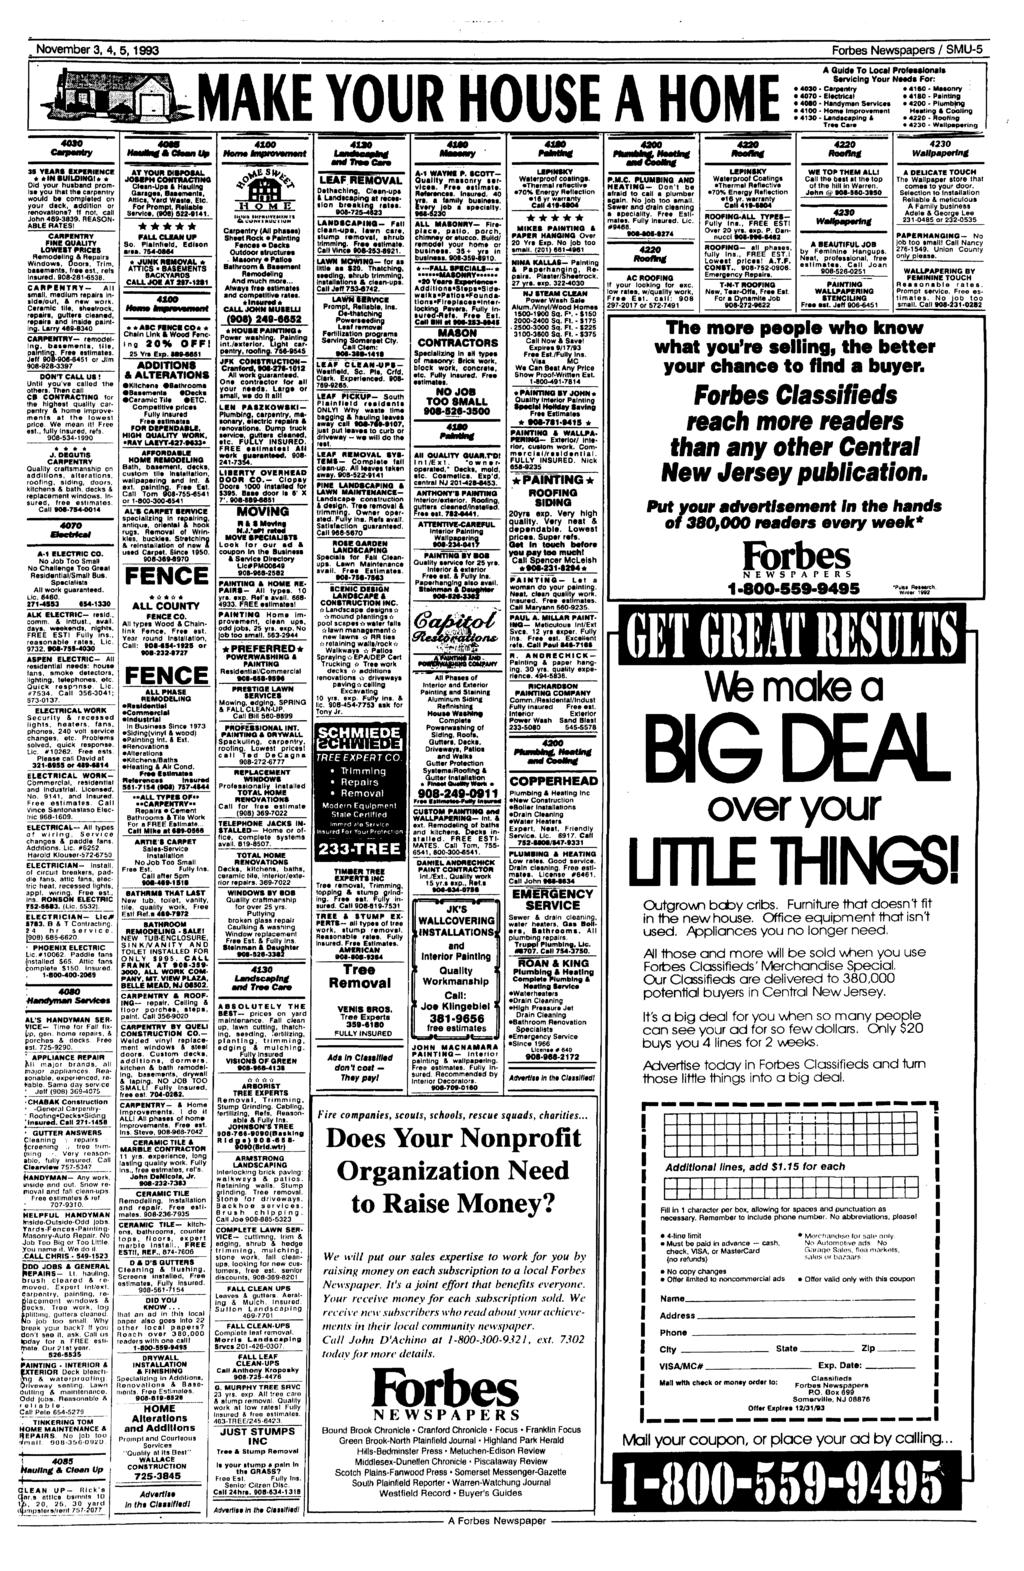 . November 3, 4, 5,1993 Forbes Newspapers / SMU-5 MAKE YOUR HOUSE A HOME A Quid* To Local Professional* Servicing Your Neadt For: 4030 Carpentry 4160 - Matonty 4070 - Eltetrlcil *41B0-Painting 4060 -